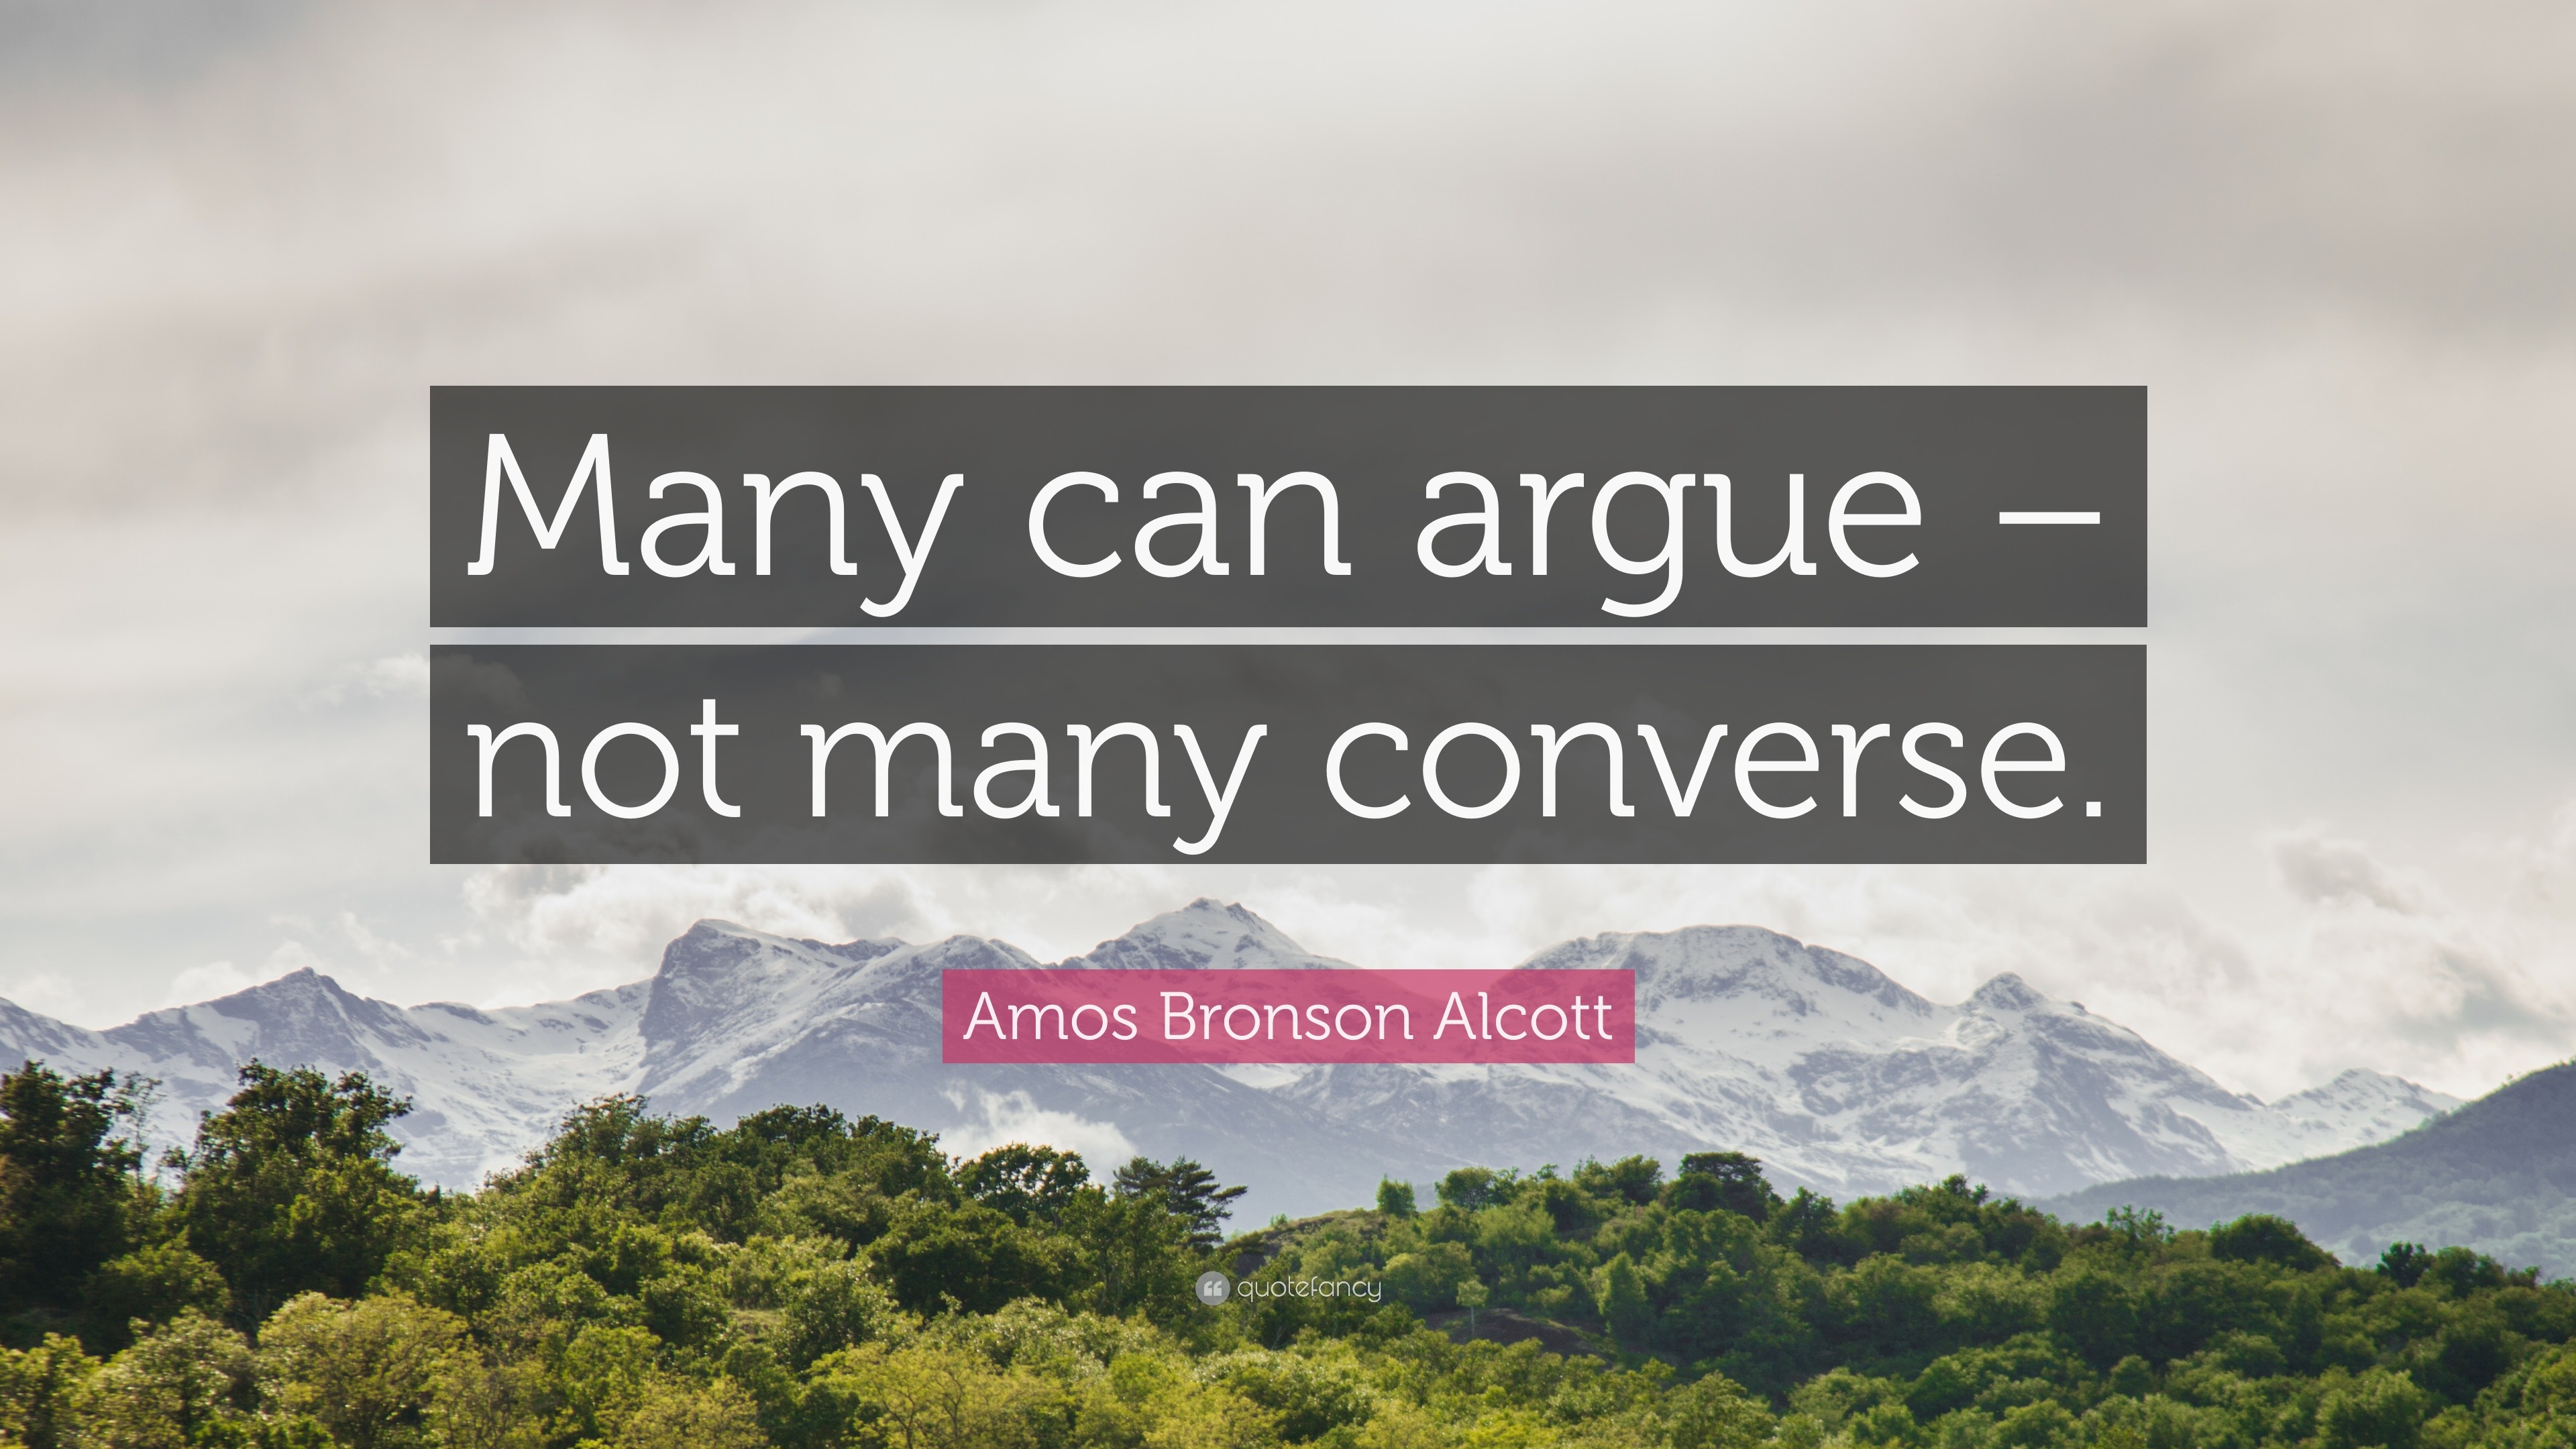 Amos Bronson Alcott Quote: "Many can argue - not many converse. 